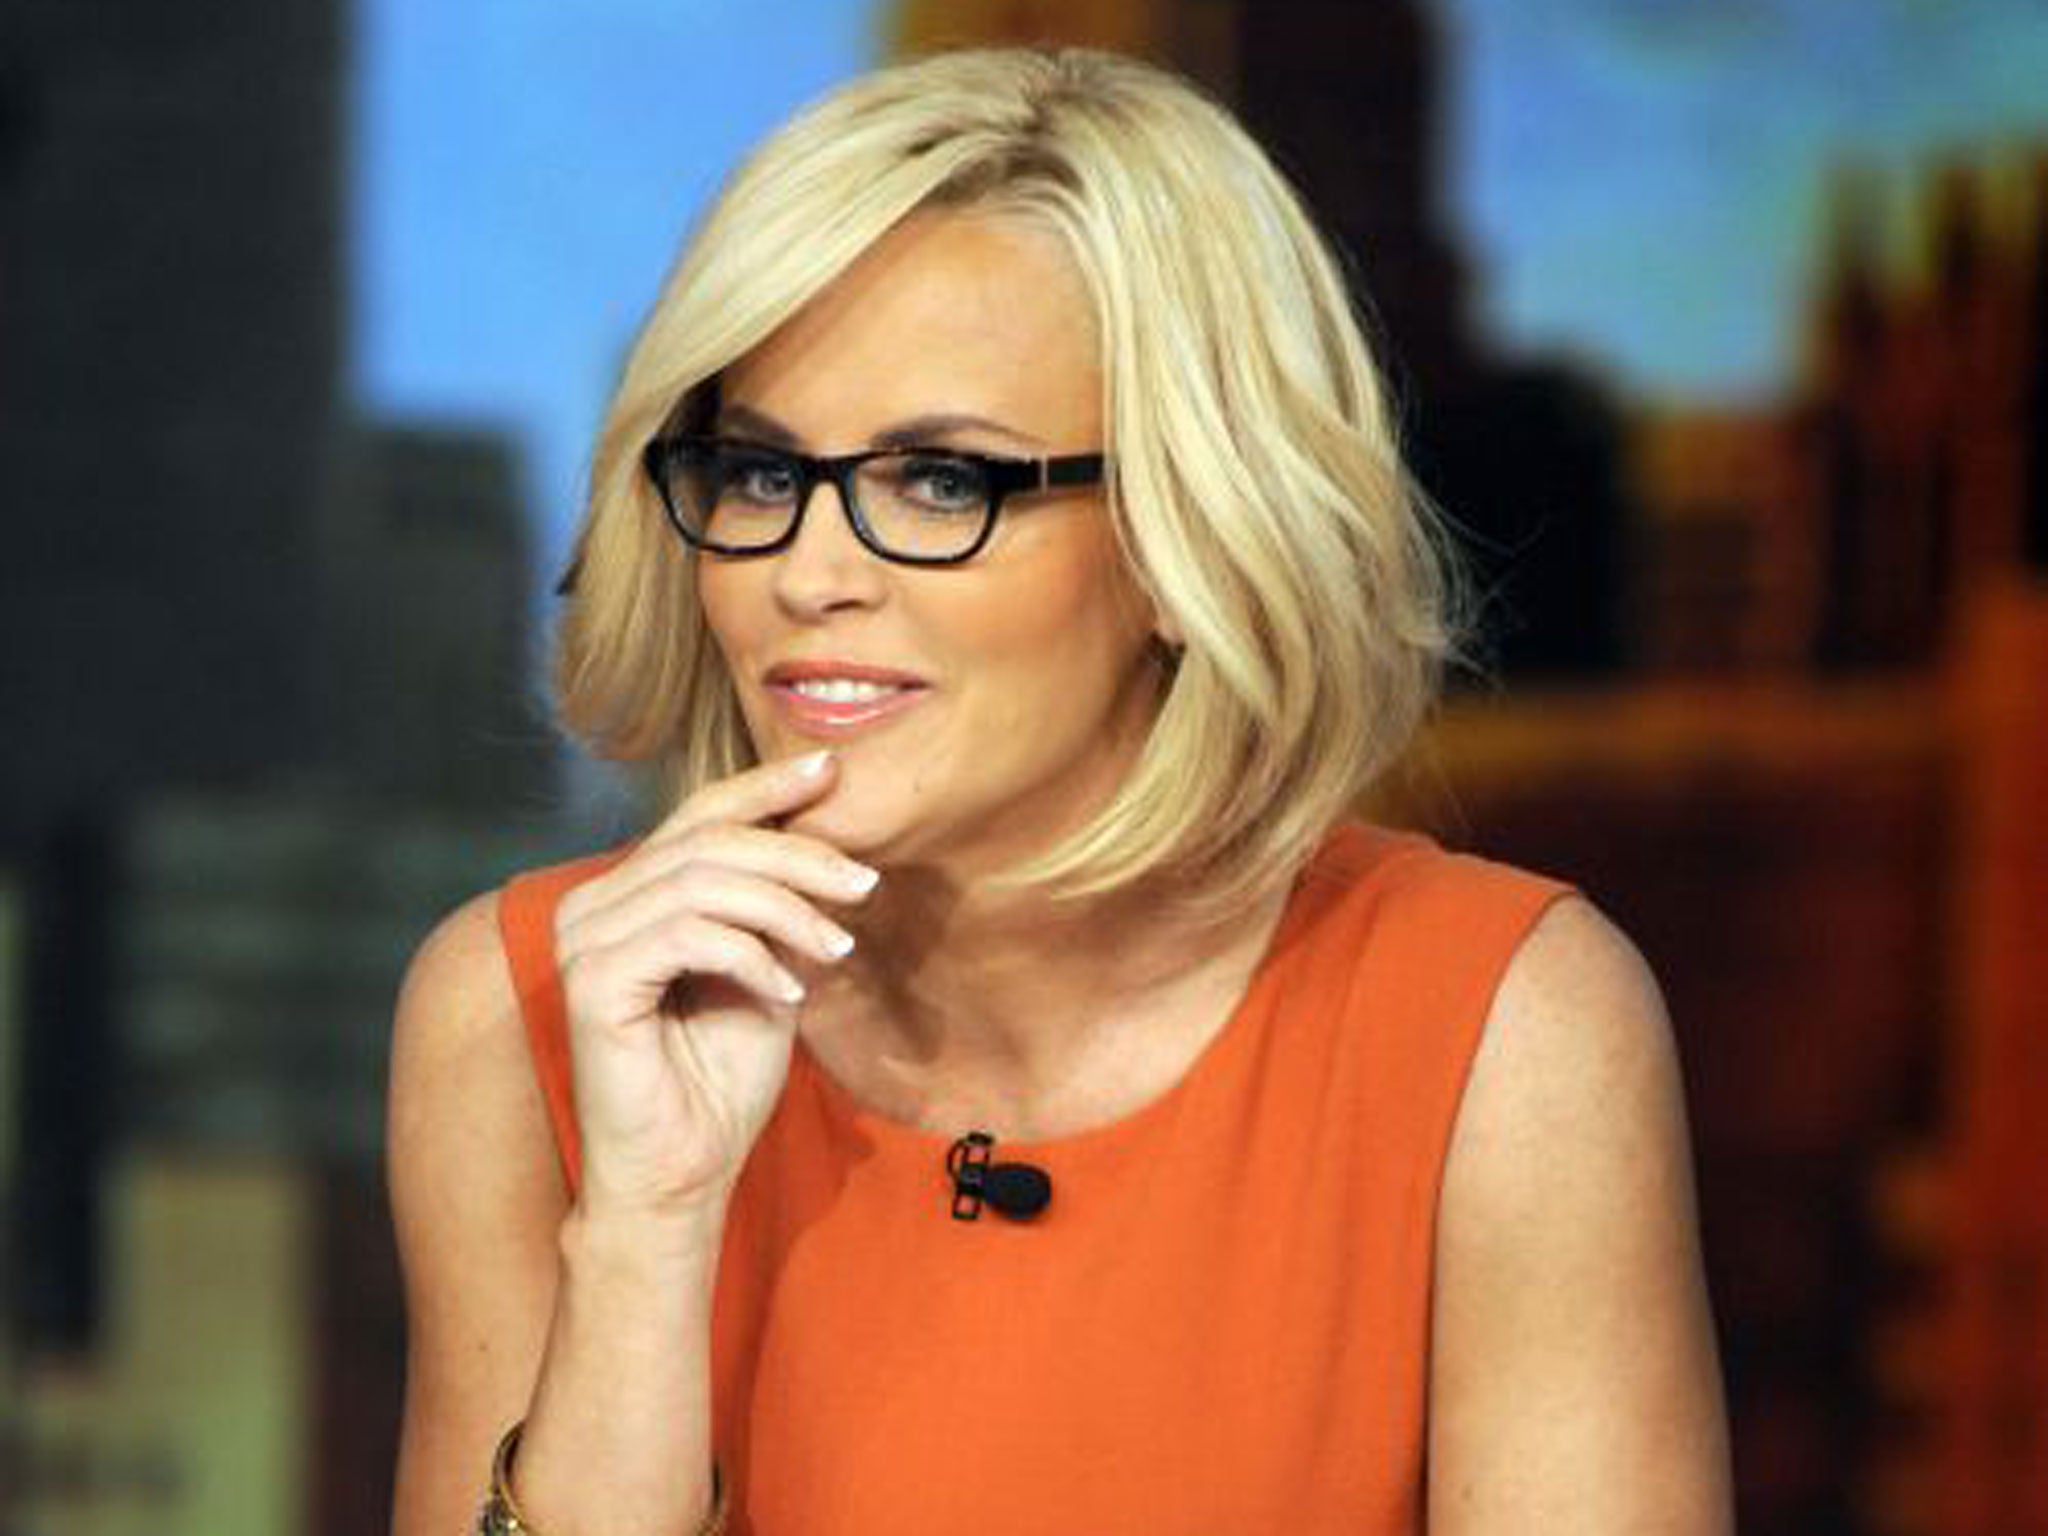 The actress and former ‘Playboy’ covergirl Jenny McCarthy